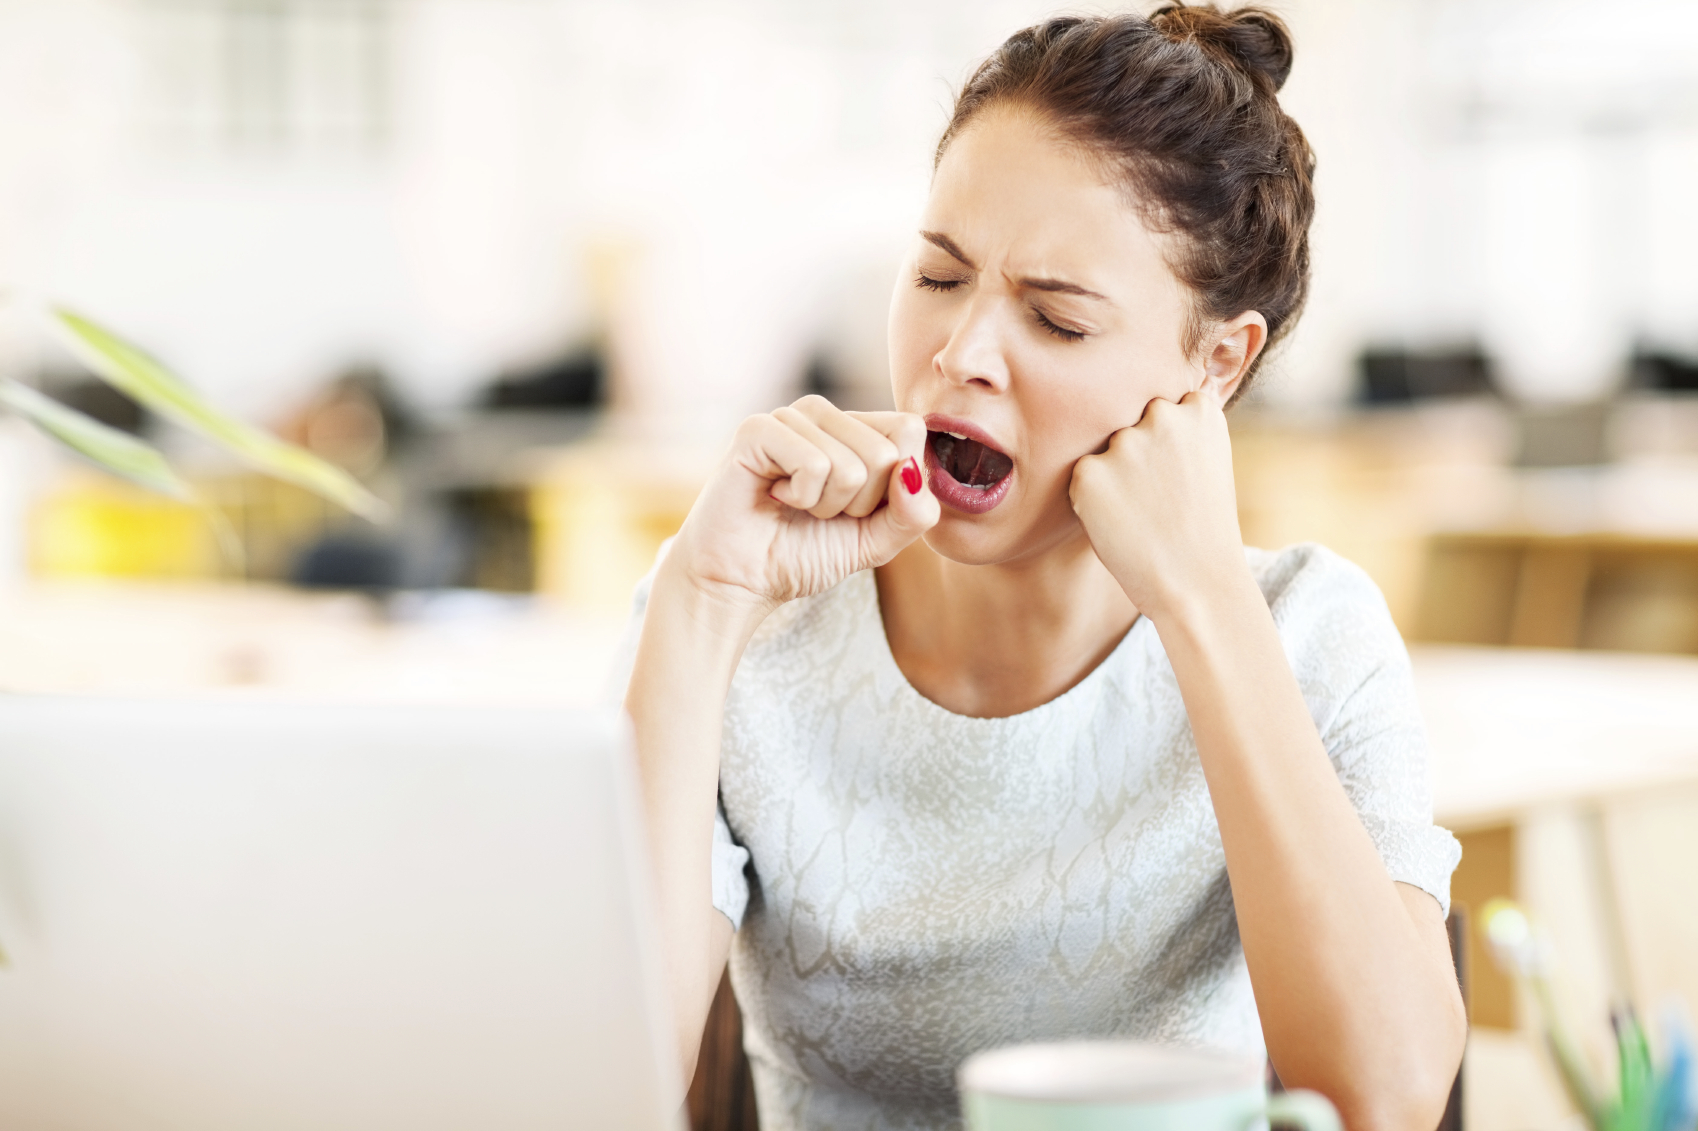 Tired woman in front of computer yawning. Creating a Sleep promoting environment is crucial to over...